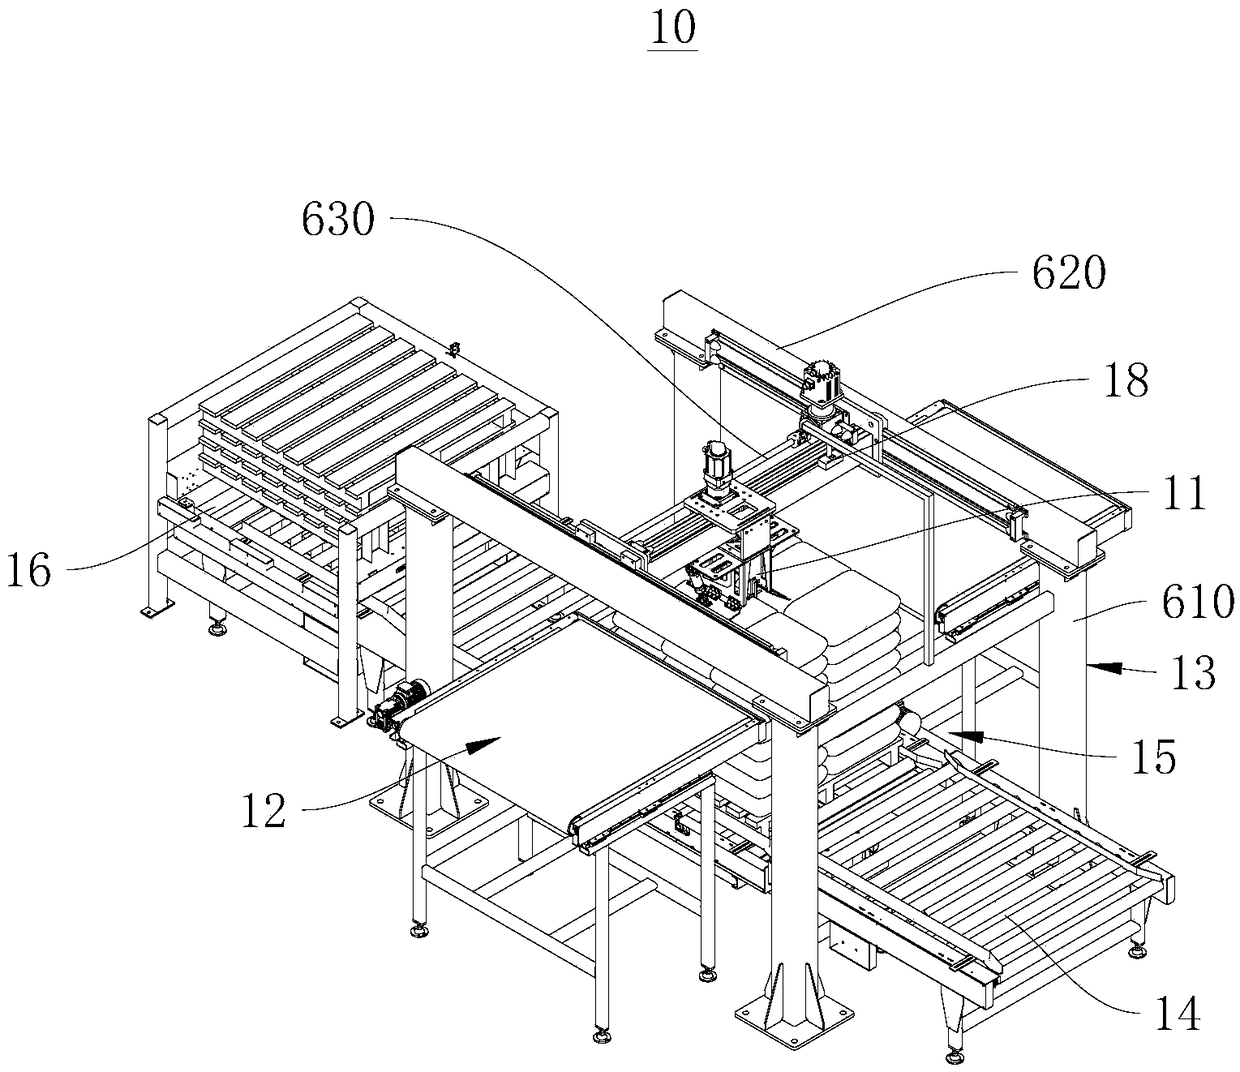 Bidirectional unstacking and taking device and bidirectional cargo unstacking equipment